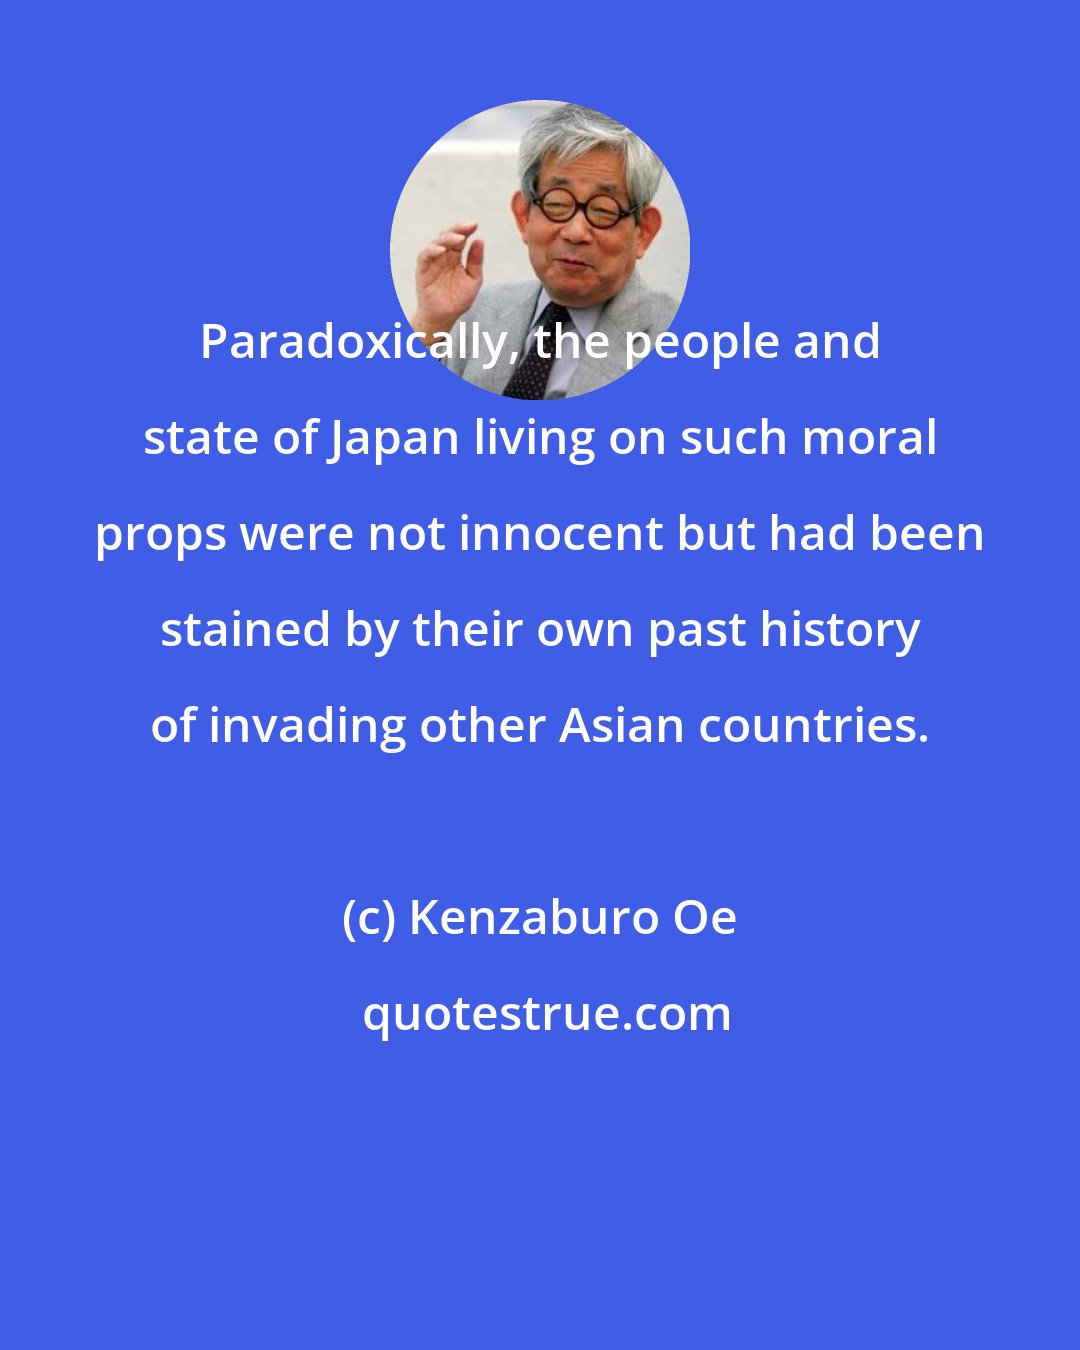 Kenzaburo Oe: Paradoxically, the people and state of Japan living on such moral props were not innocent but had been stained by their own past history of invading other Asian countries.